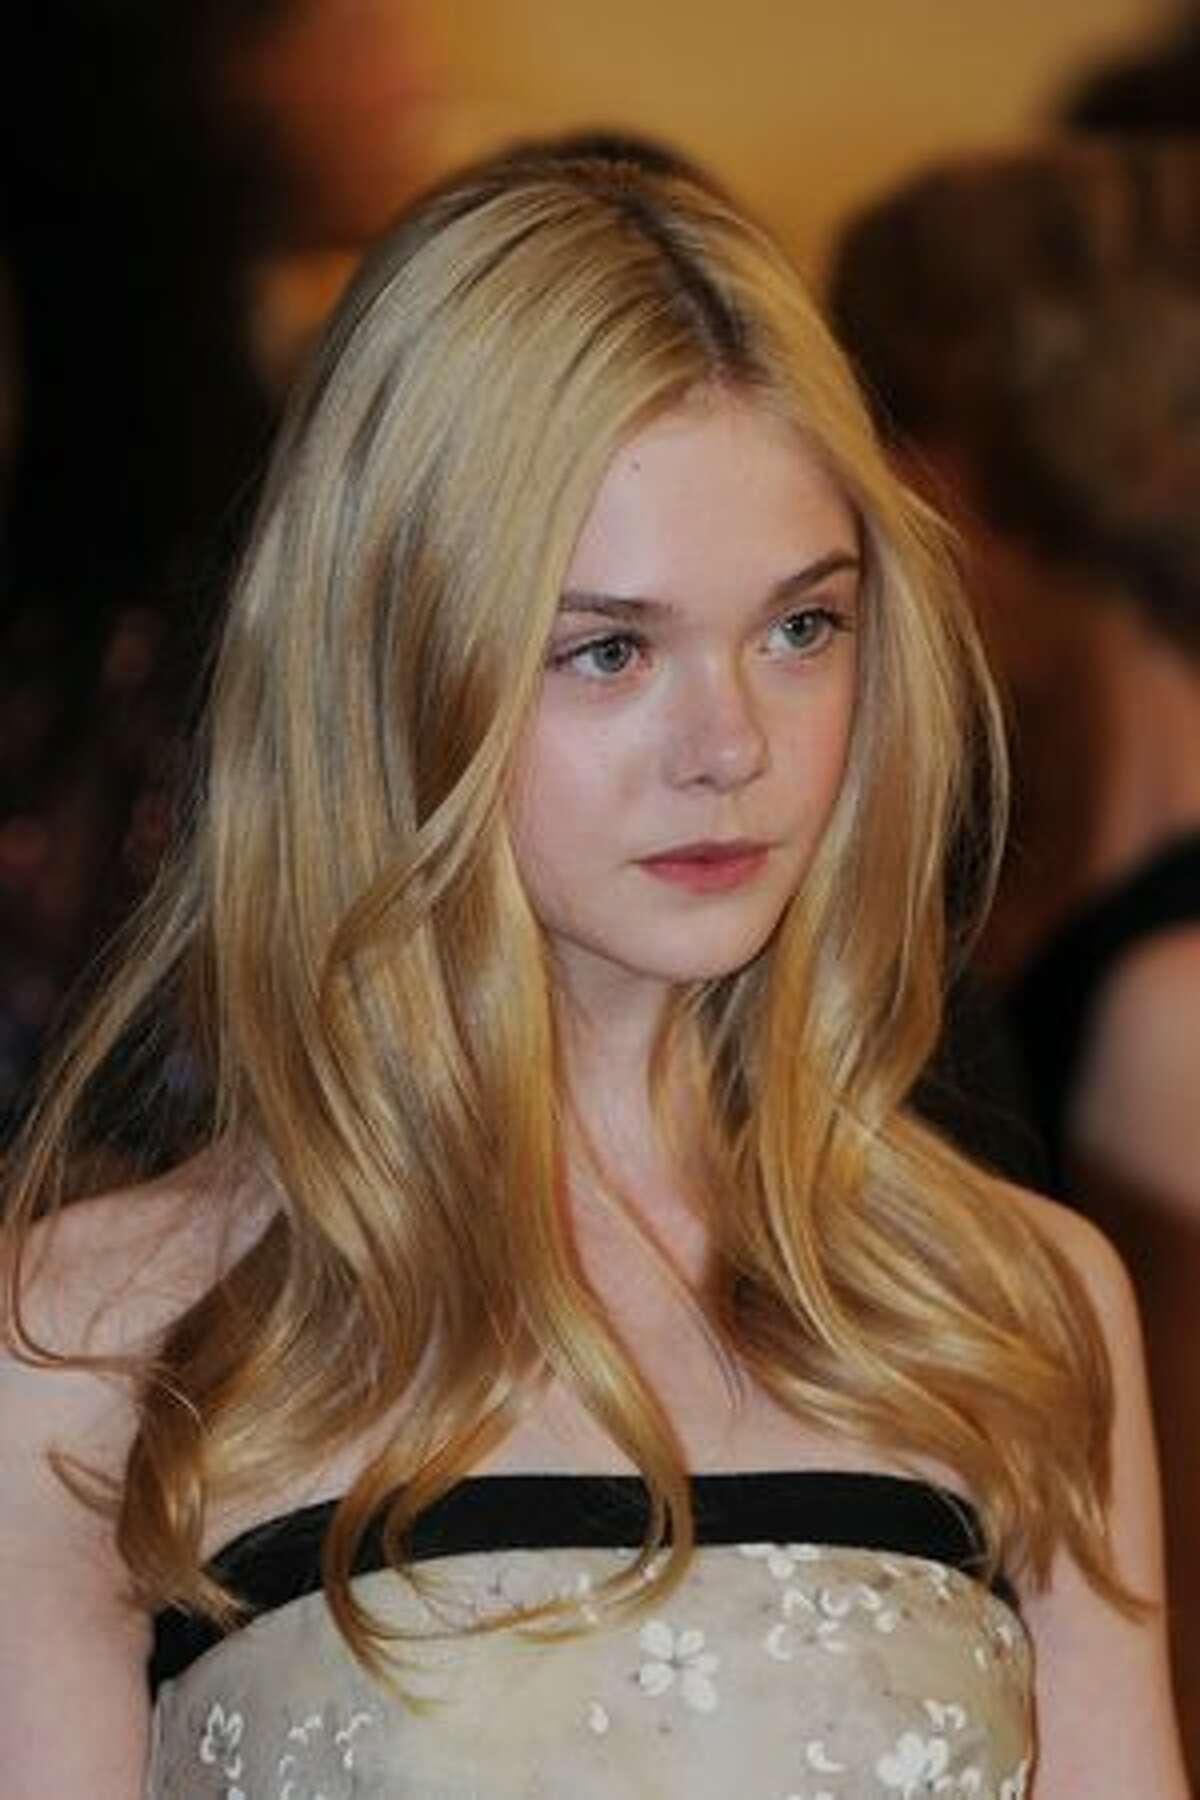 Actress Elle Fanning arrives on the red carpet for the 2010 Oscars Governors Ball.